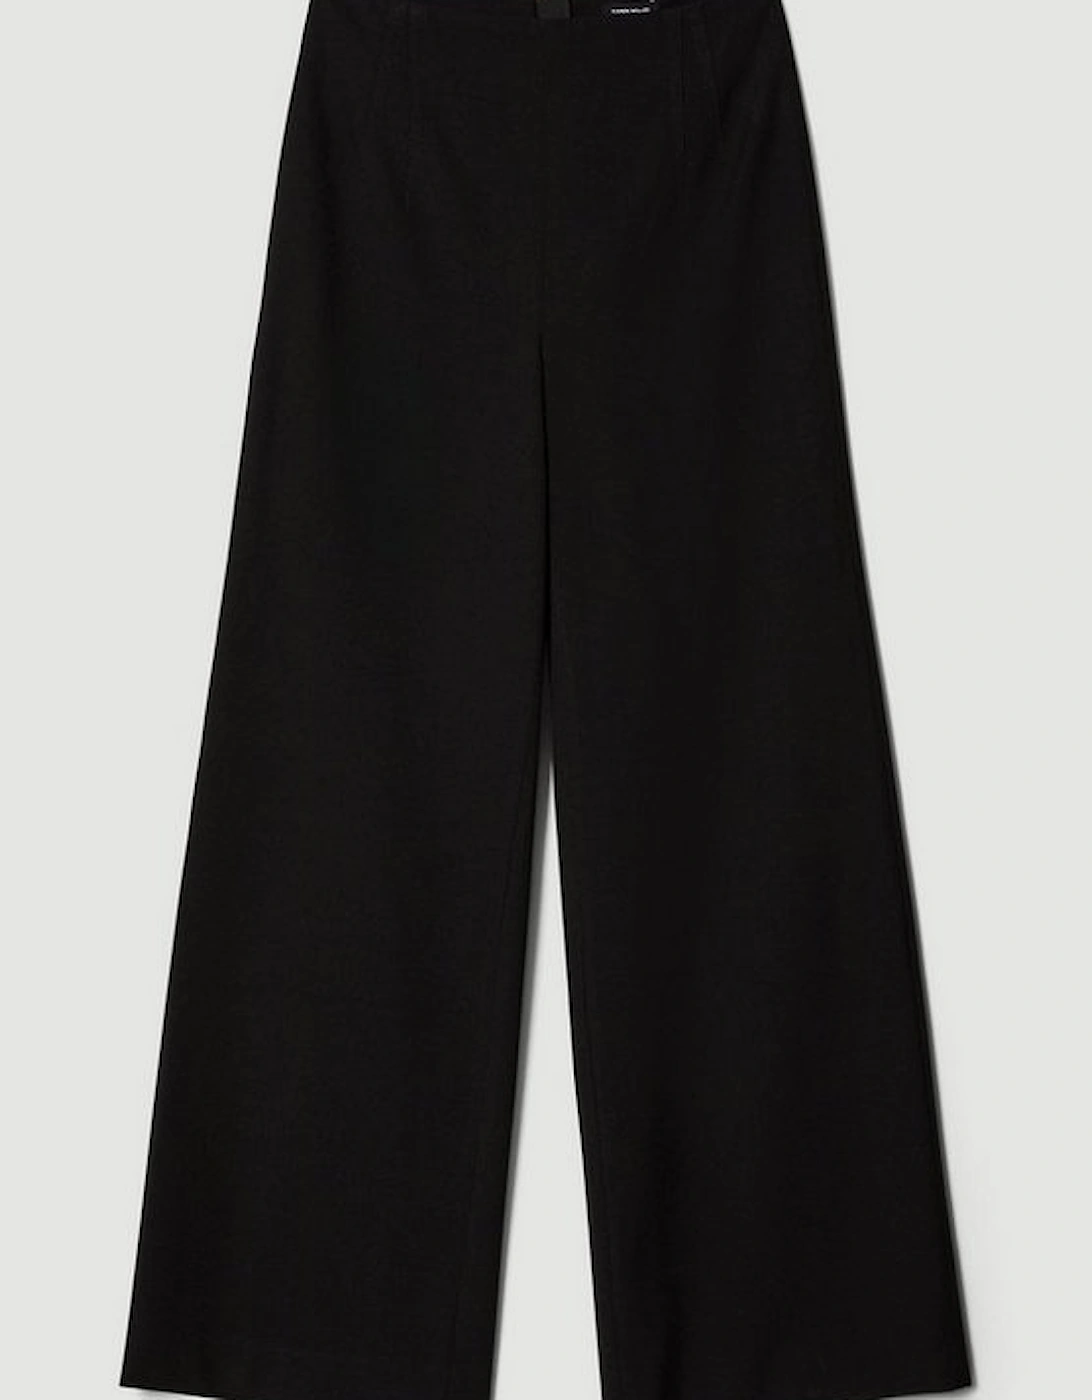 Structured Crepe Tailored High Waist Wide Leg Trouser